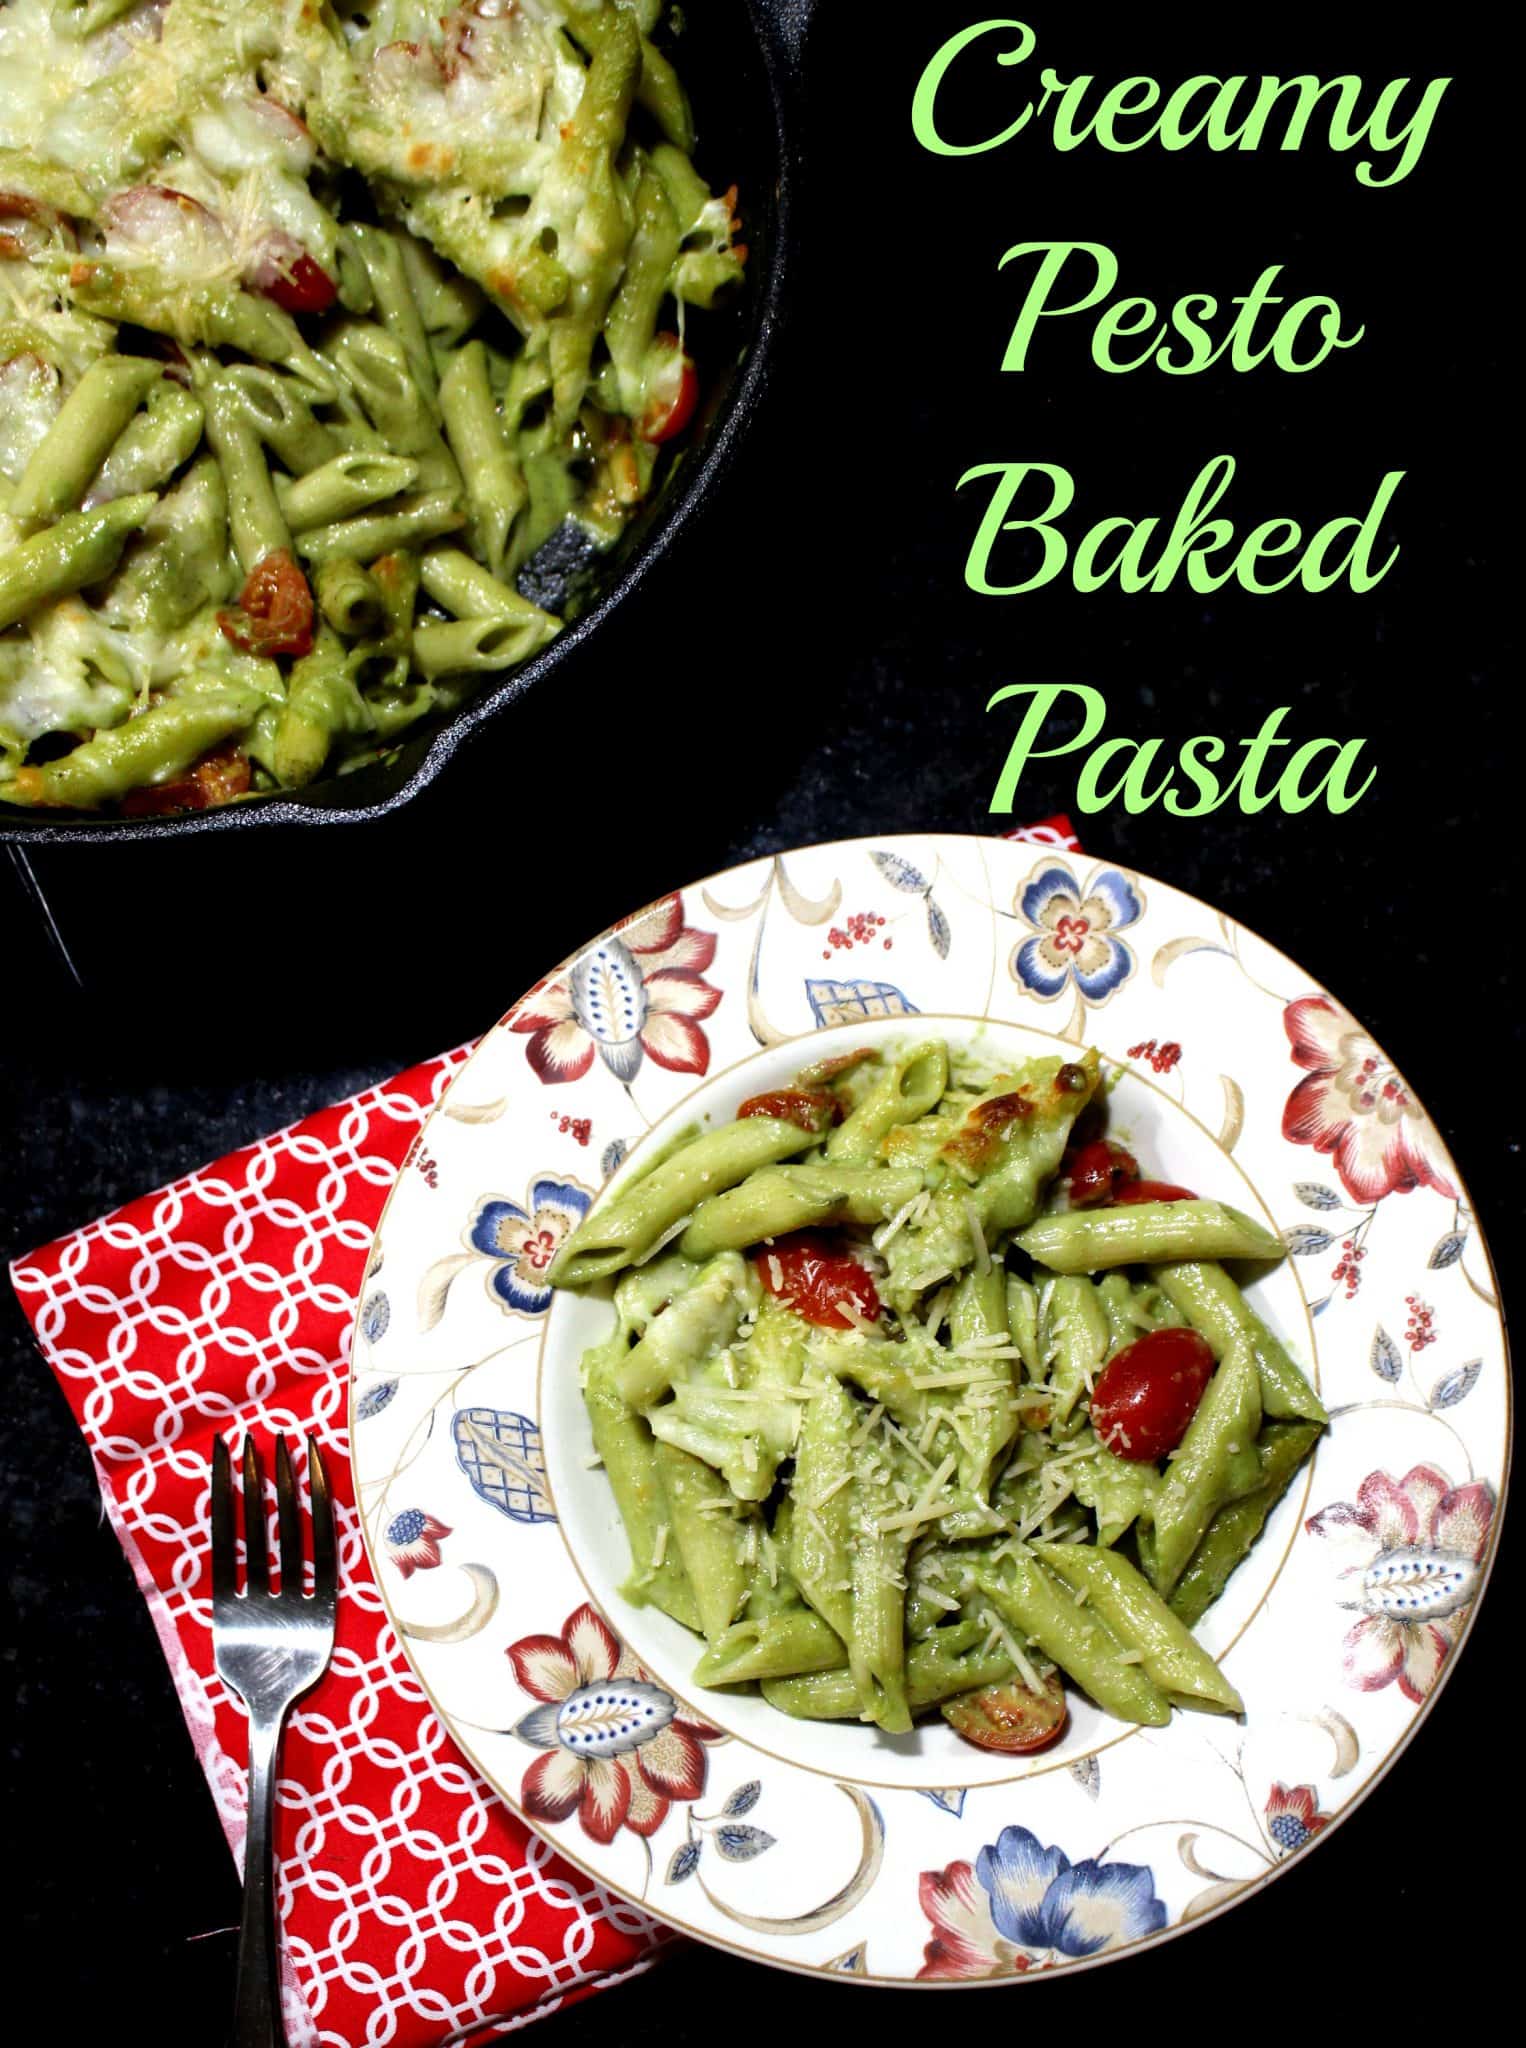 Baked Pasta with Pesto and Cherry Tomatoes.